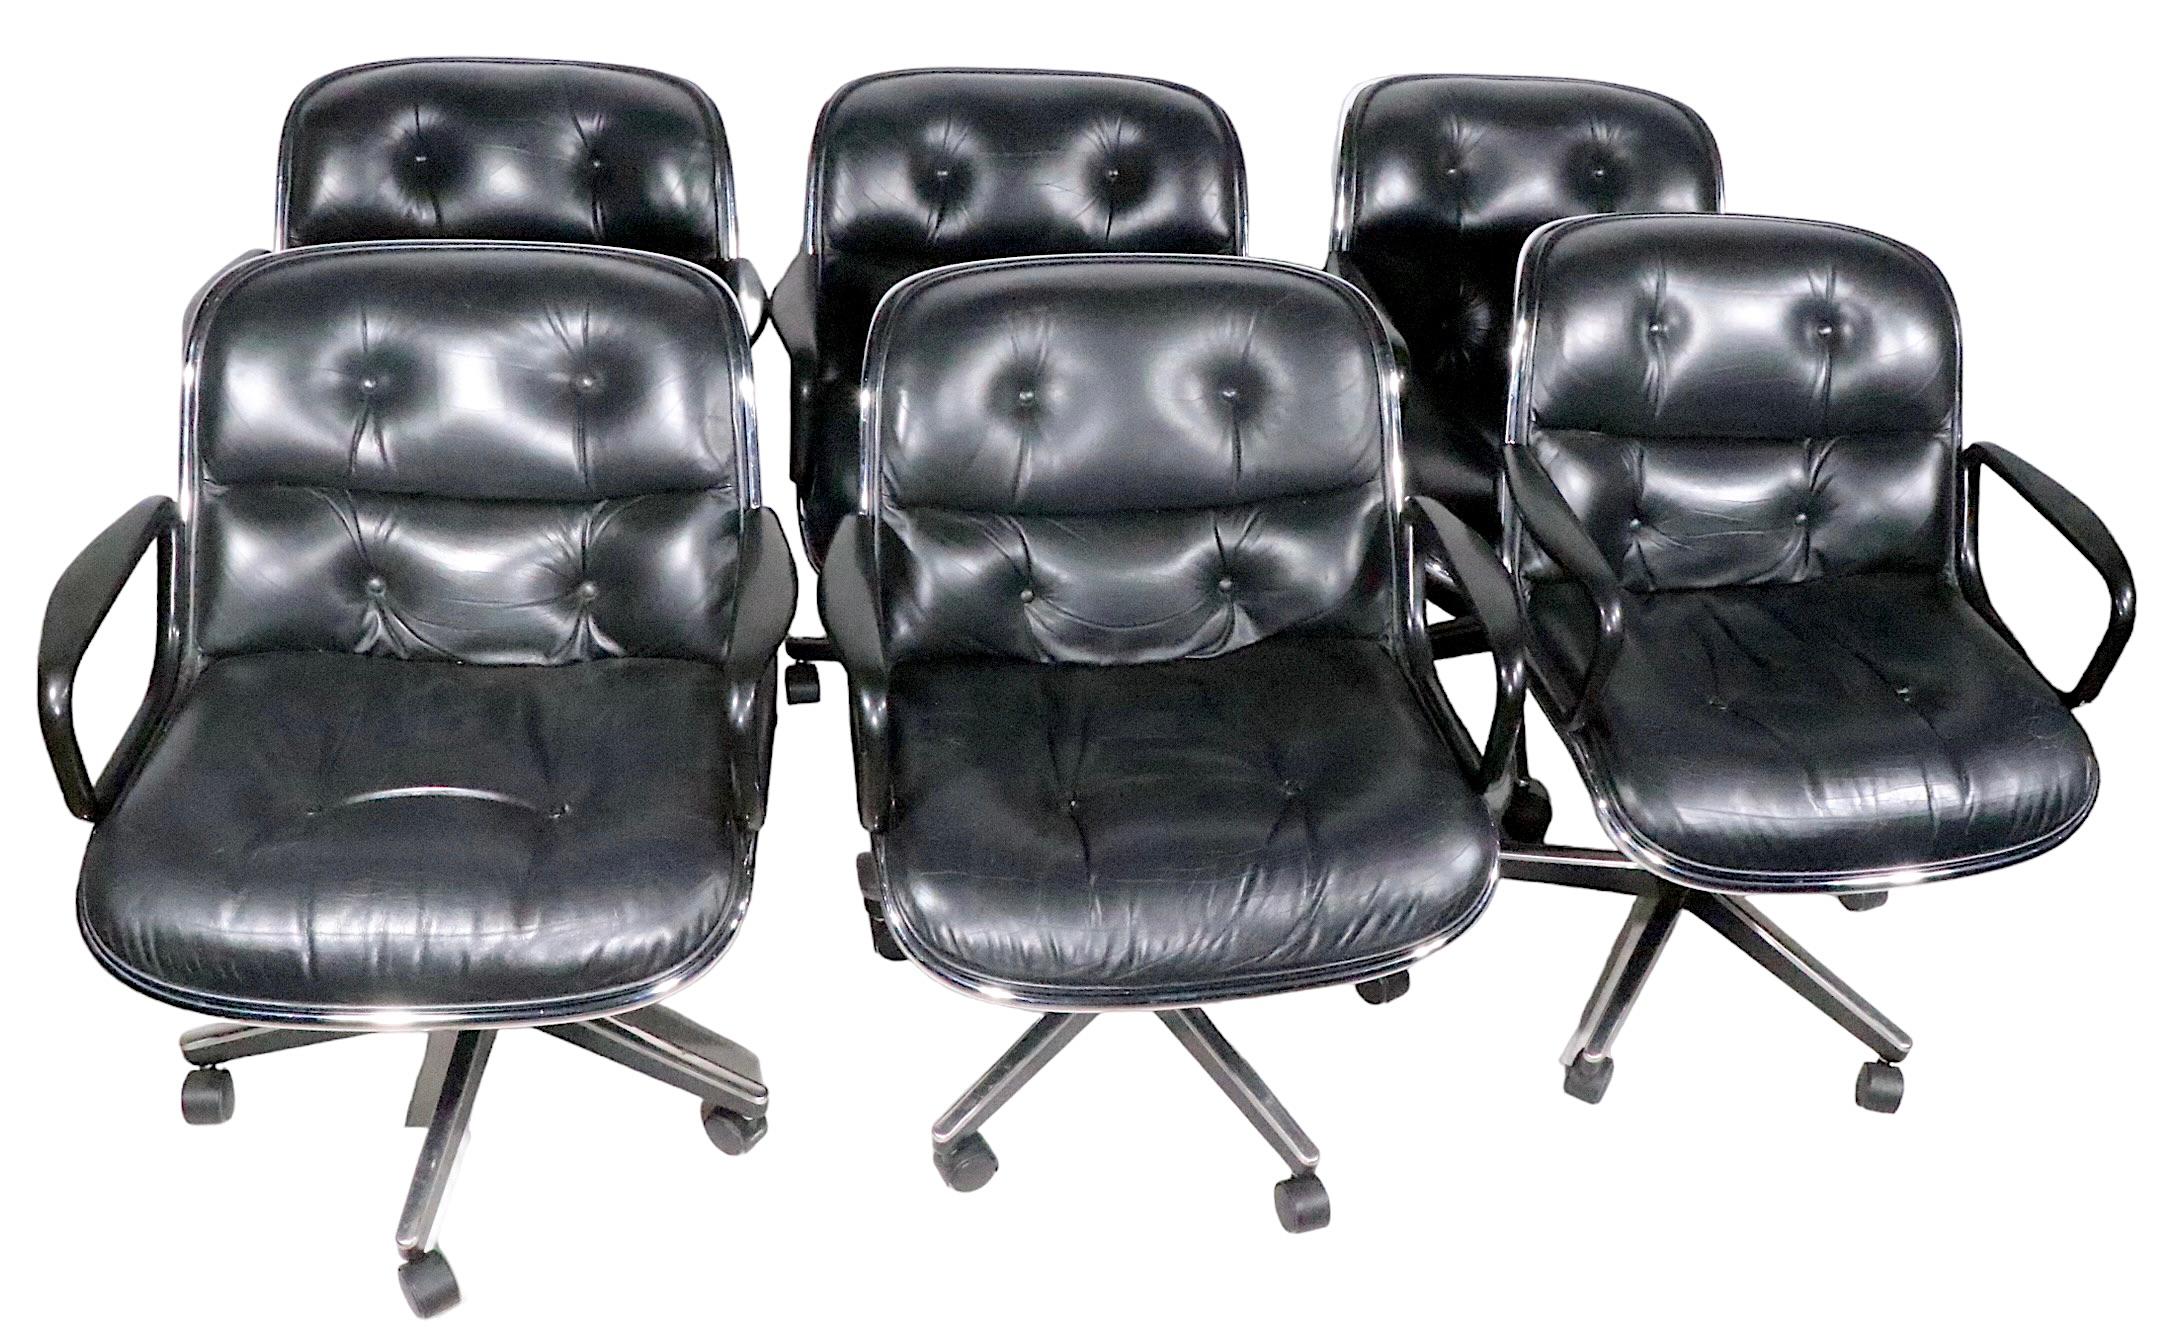 American 5 Knoll Swivel Tilt Office Chairs Designed by Charles Pollock for Knoll c 1960's